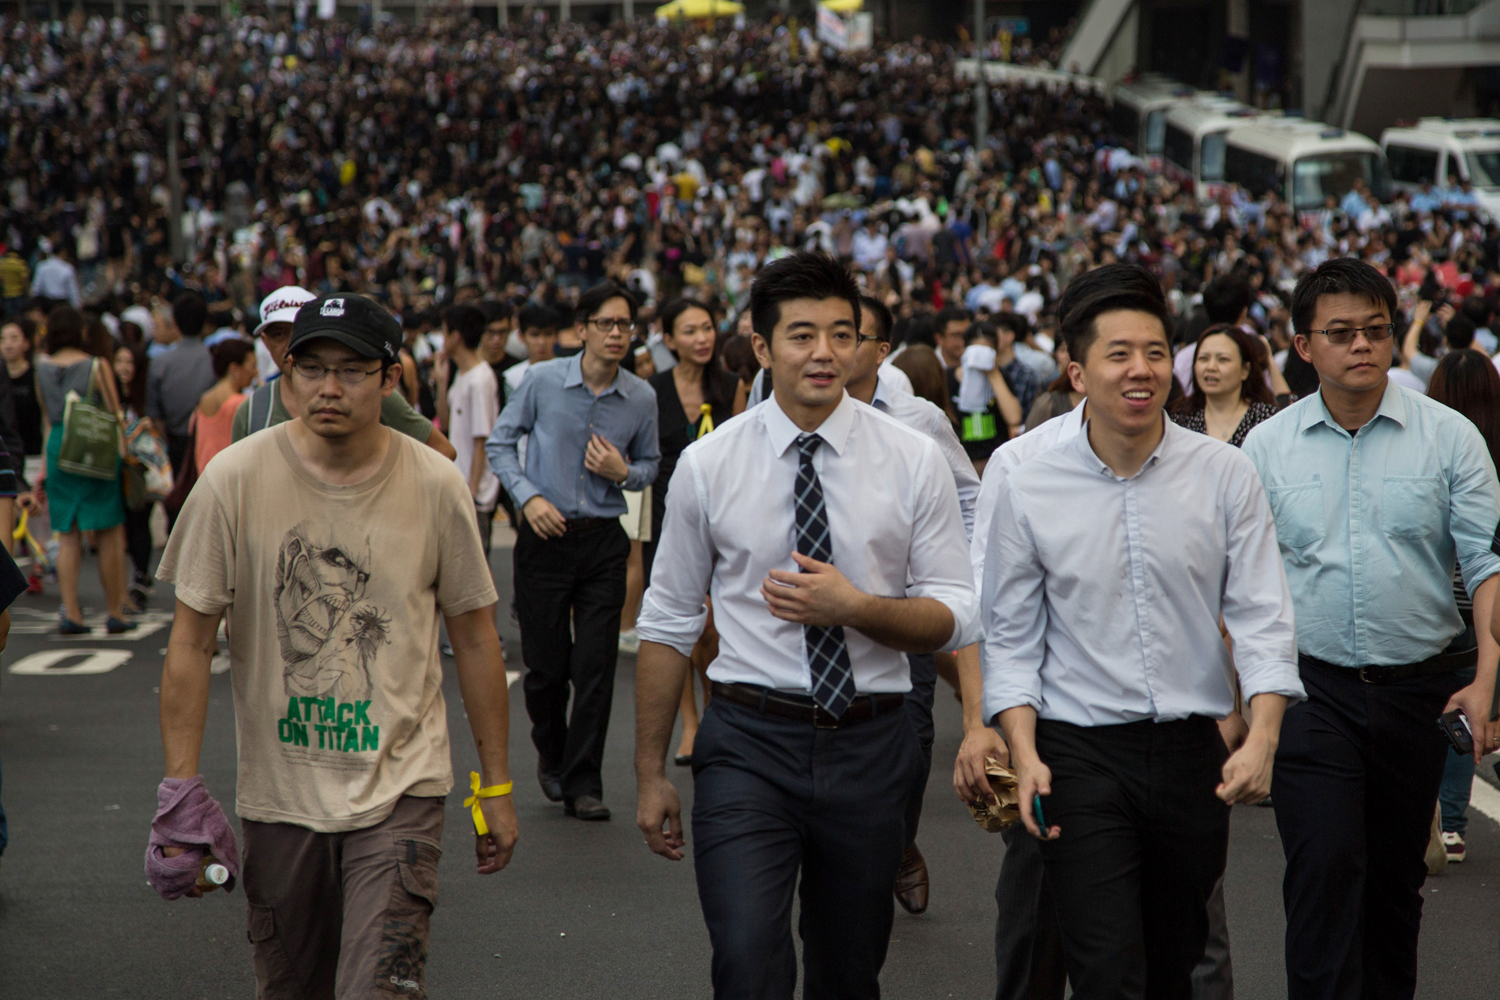 Office workers walk through closed off streets in front of protesters near the central government offices in the business district of Central in Hong Kong on Sept. 29, 2014 (Bloomberg—Getty Images)